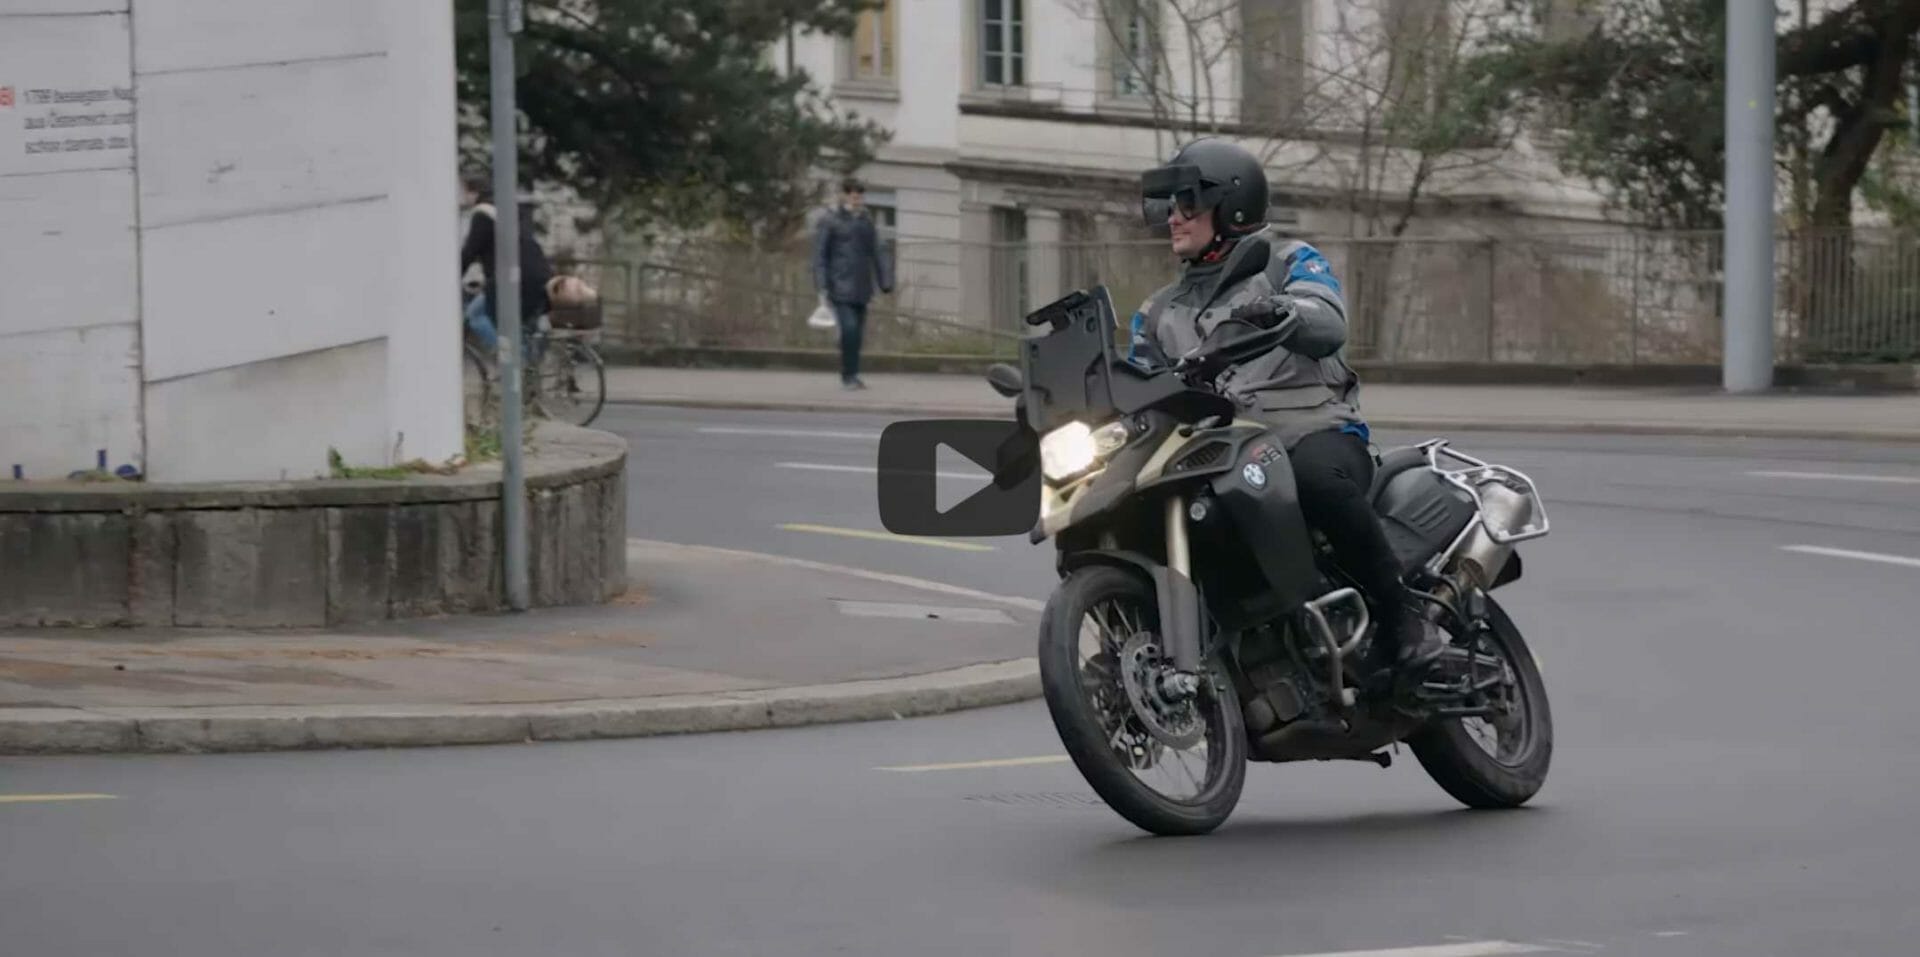 ETH wants to make motorcycling safer with augmented reality
- also in the MOTORCYCLES.NEWS APP